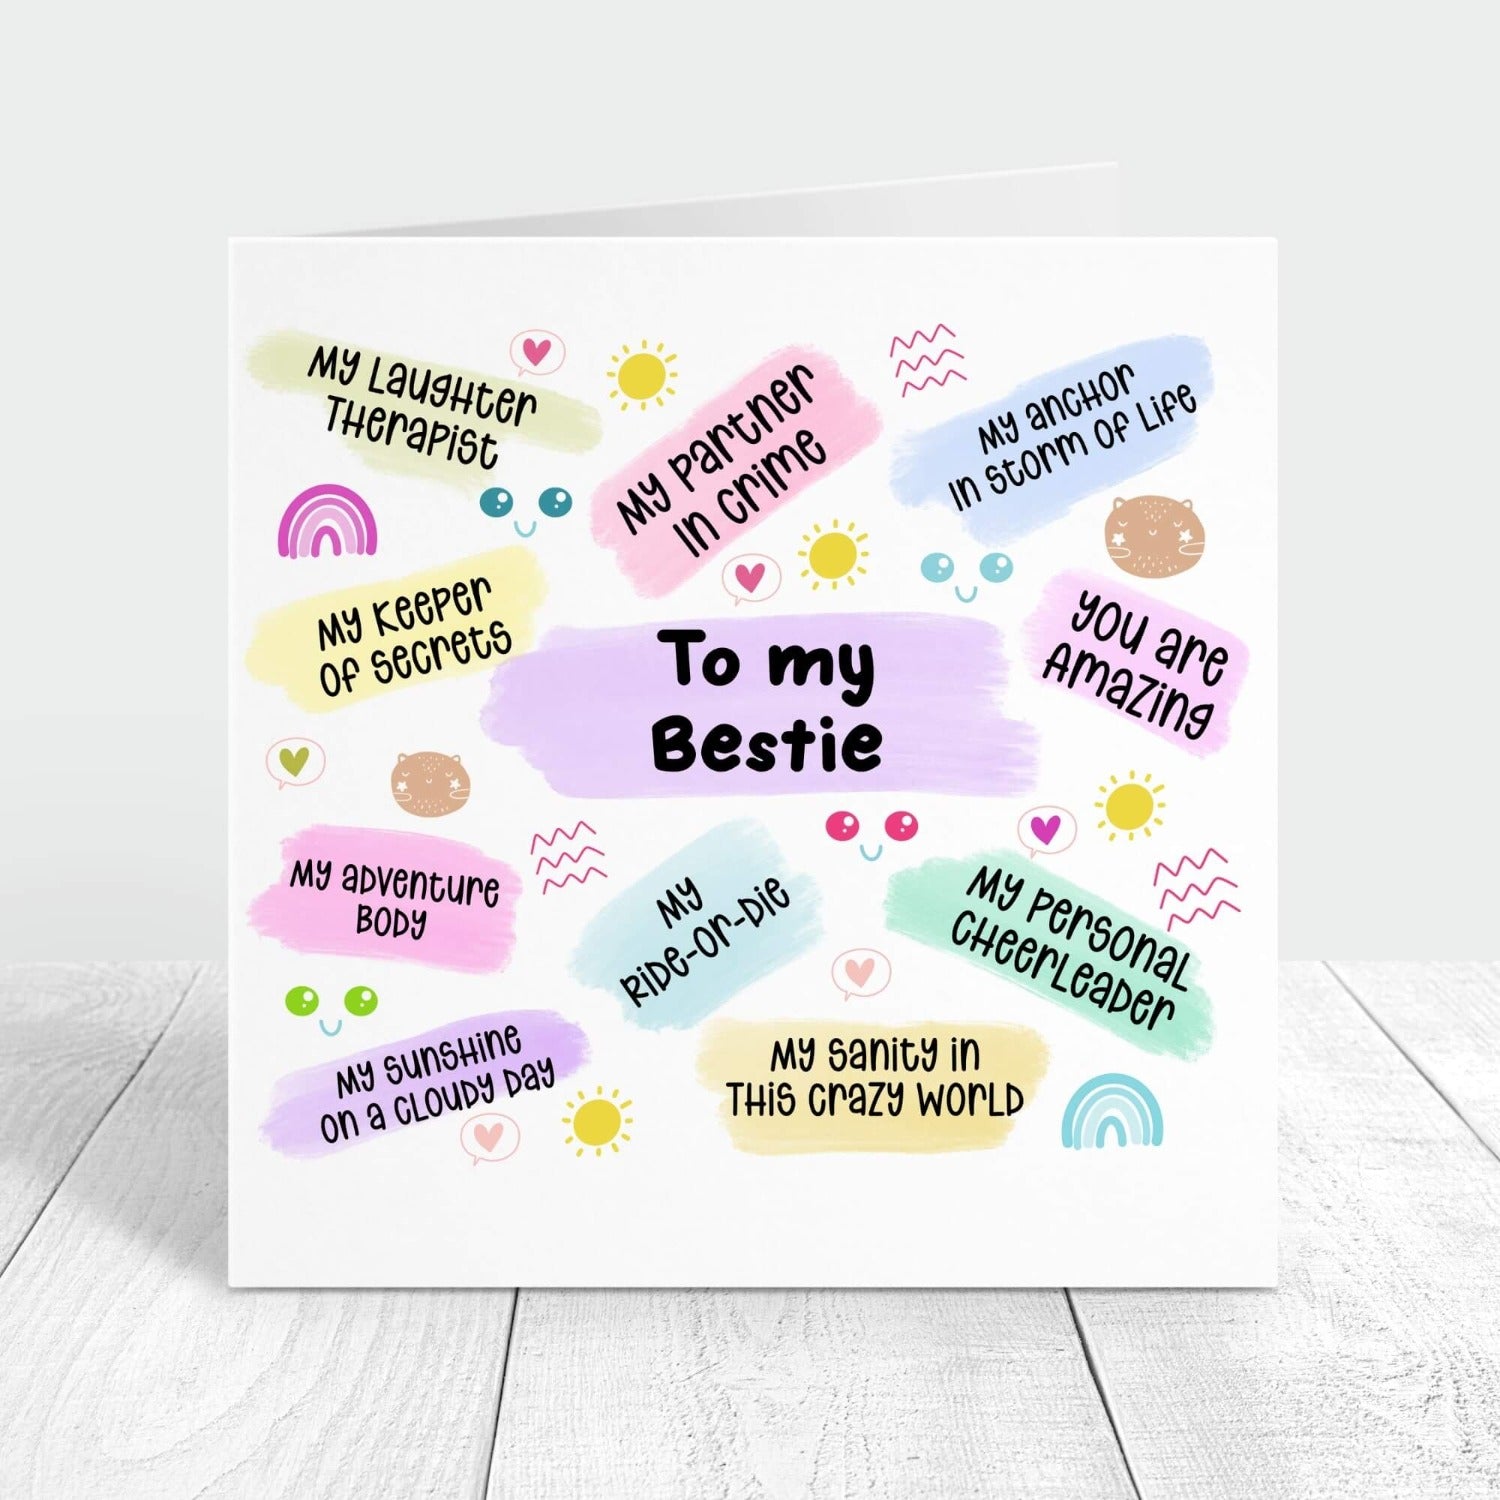 personalised birthday card for bestie with affirmations